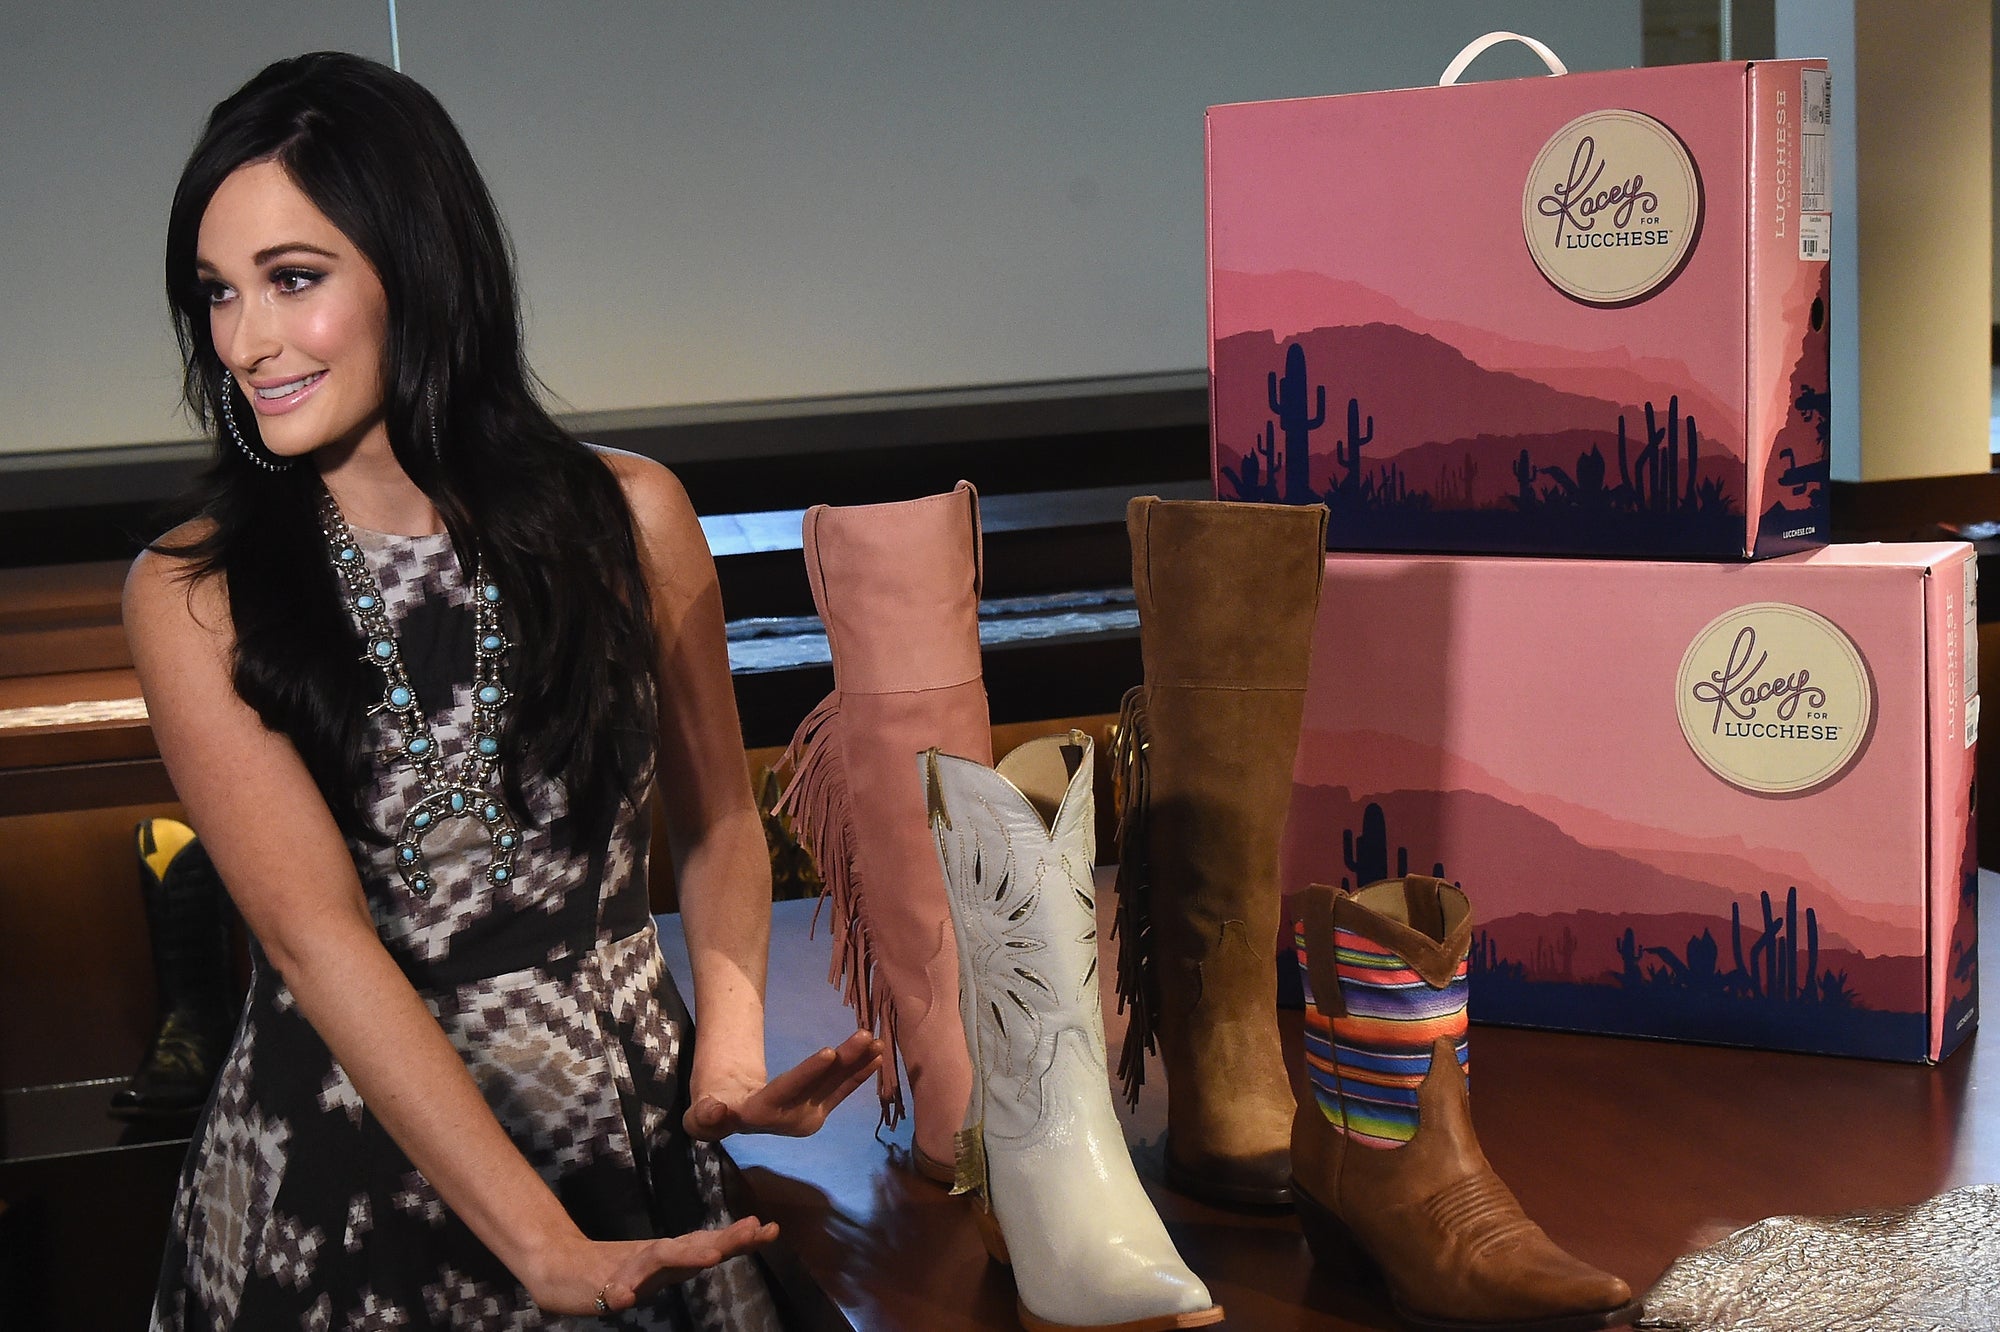 EXCLUSIVE: Golden Girl Talk with Kacey Musgraves